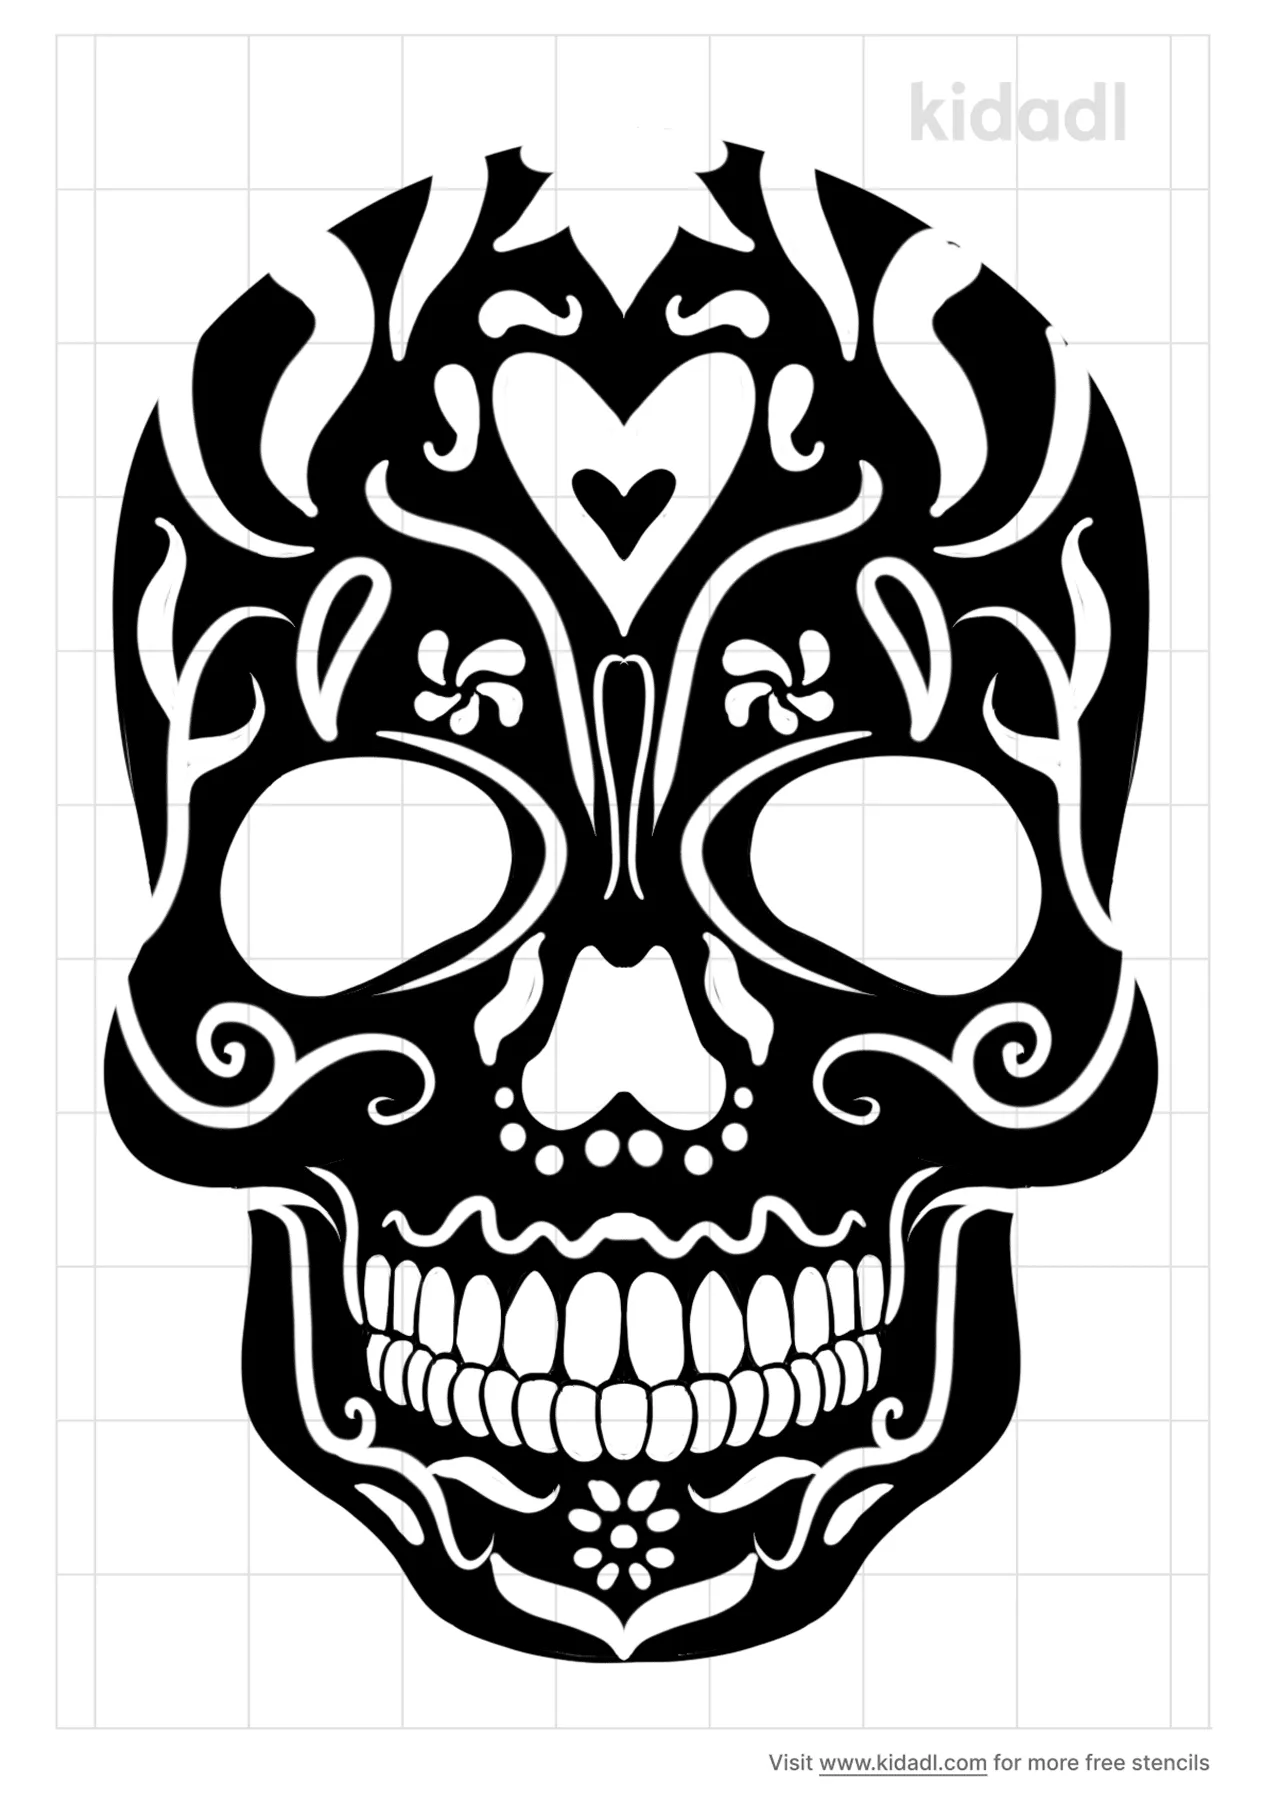 free-detailed-day-of-the-dead-stencil-stencil-printables-kidadl